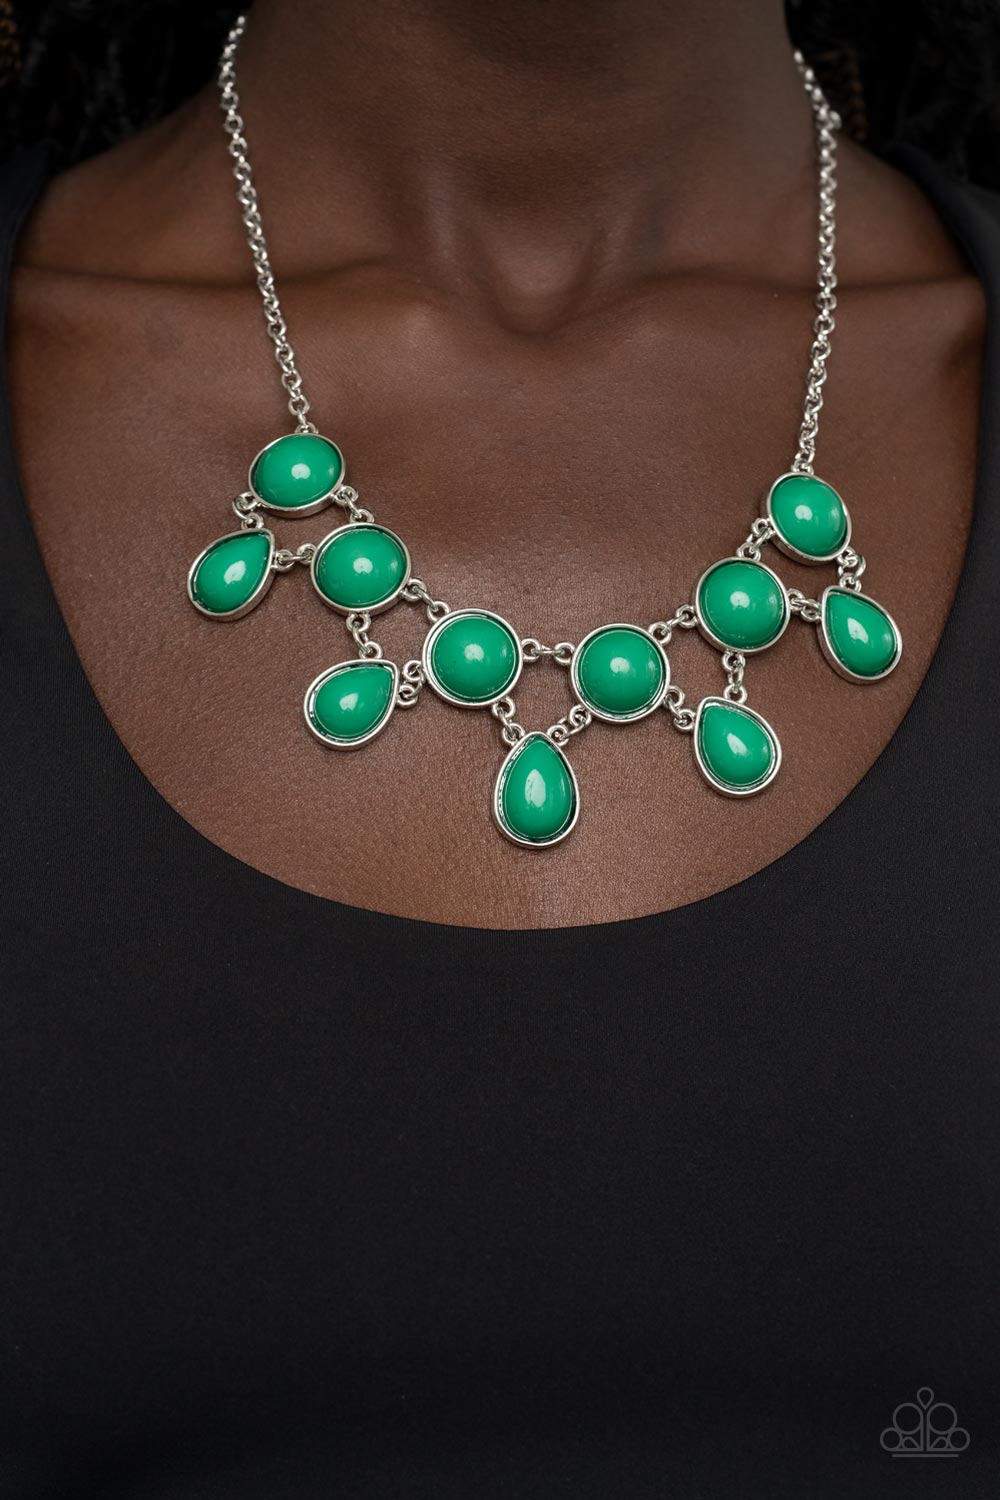 Paparazzi Accessories - Very Valley Girl - Green Necklaces a refreshing collection of Leprechaun teardrop beads links to the bottom row of oversized round Leprechaun beads, interlocking into a glamorous pop of color below the collar. Features an adjustable clasp closure.  Sold as one individual necklace. Includes one pair of matching earrings.